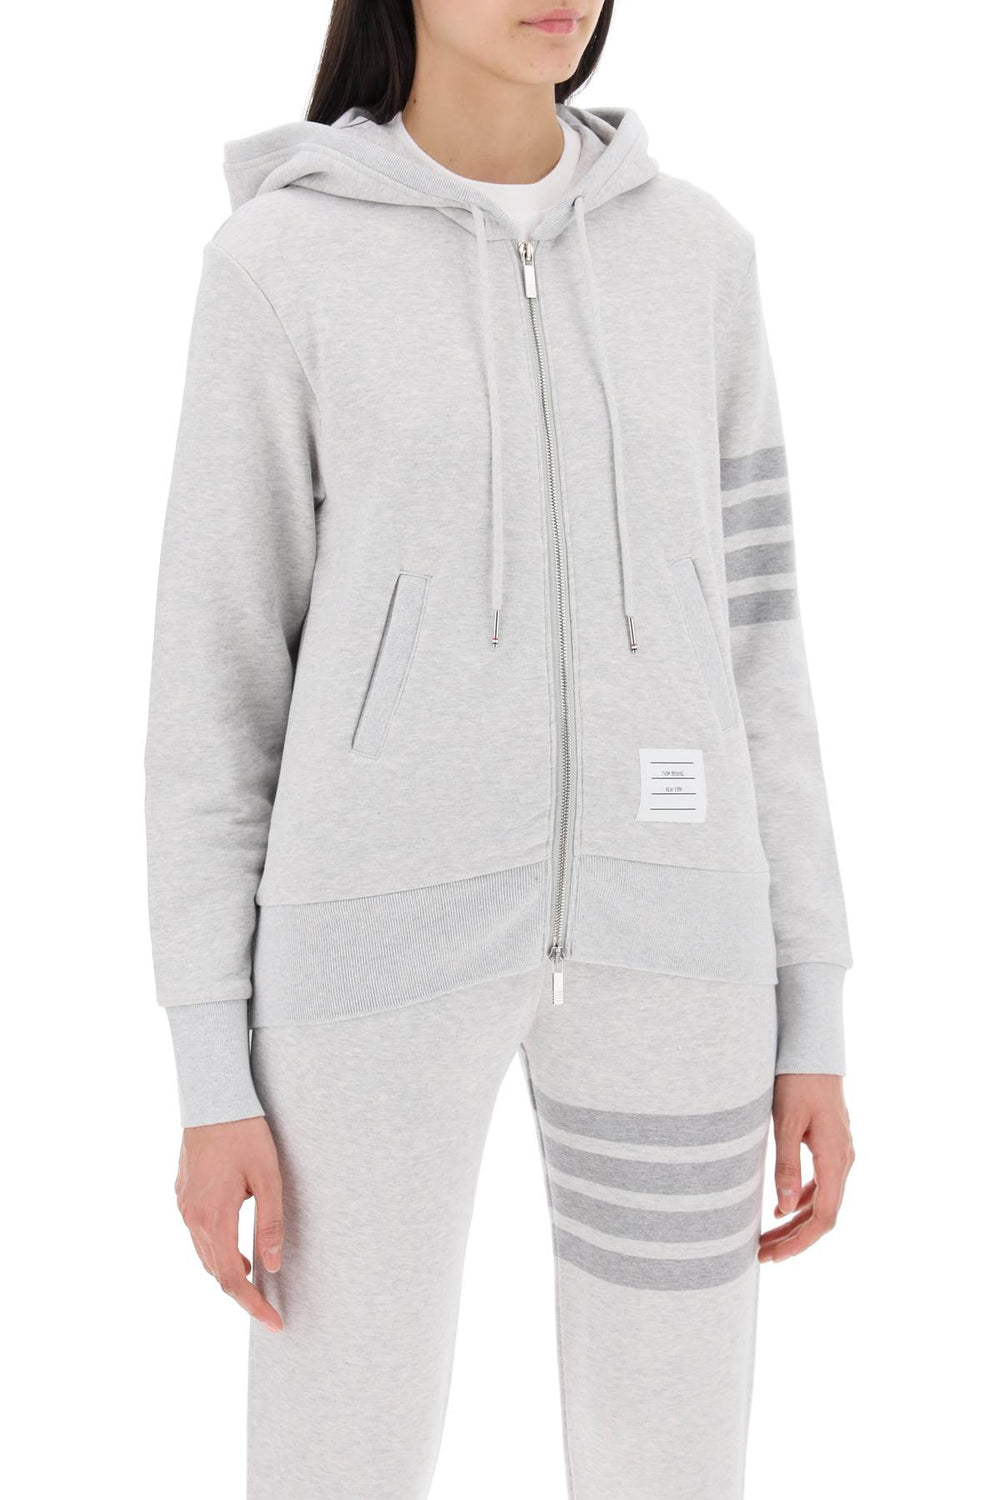 4-bar hoodie with zipper and-1